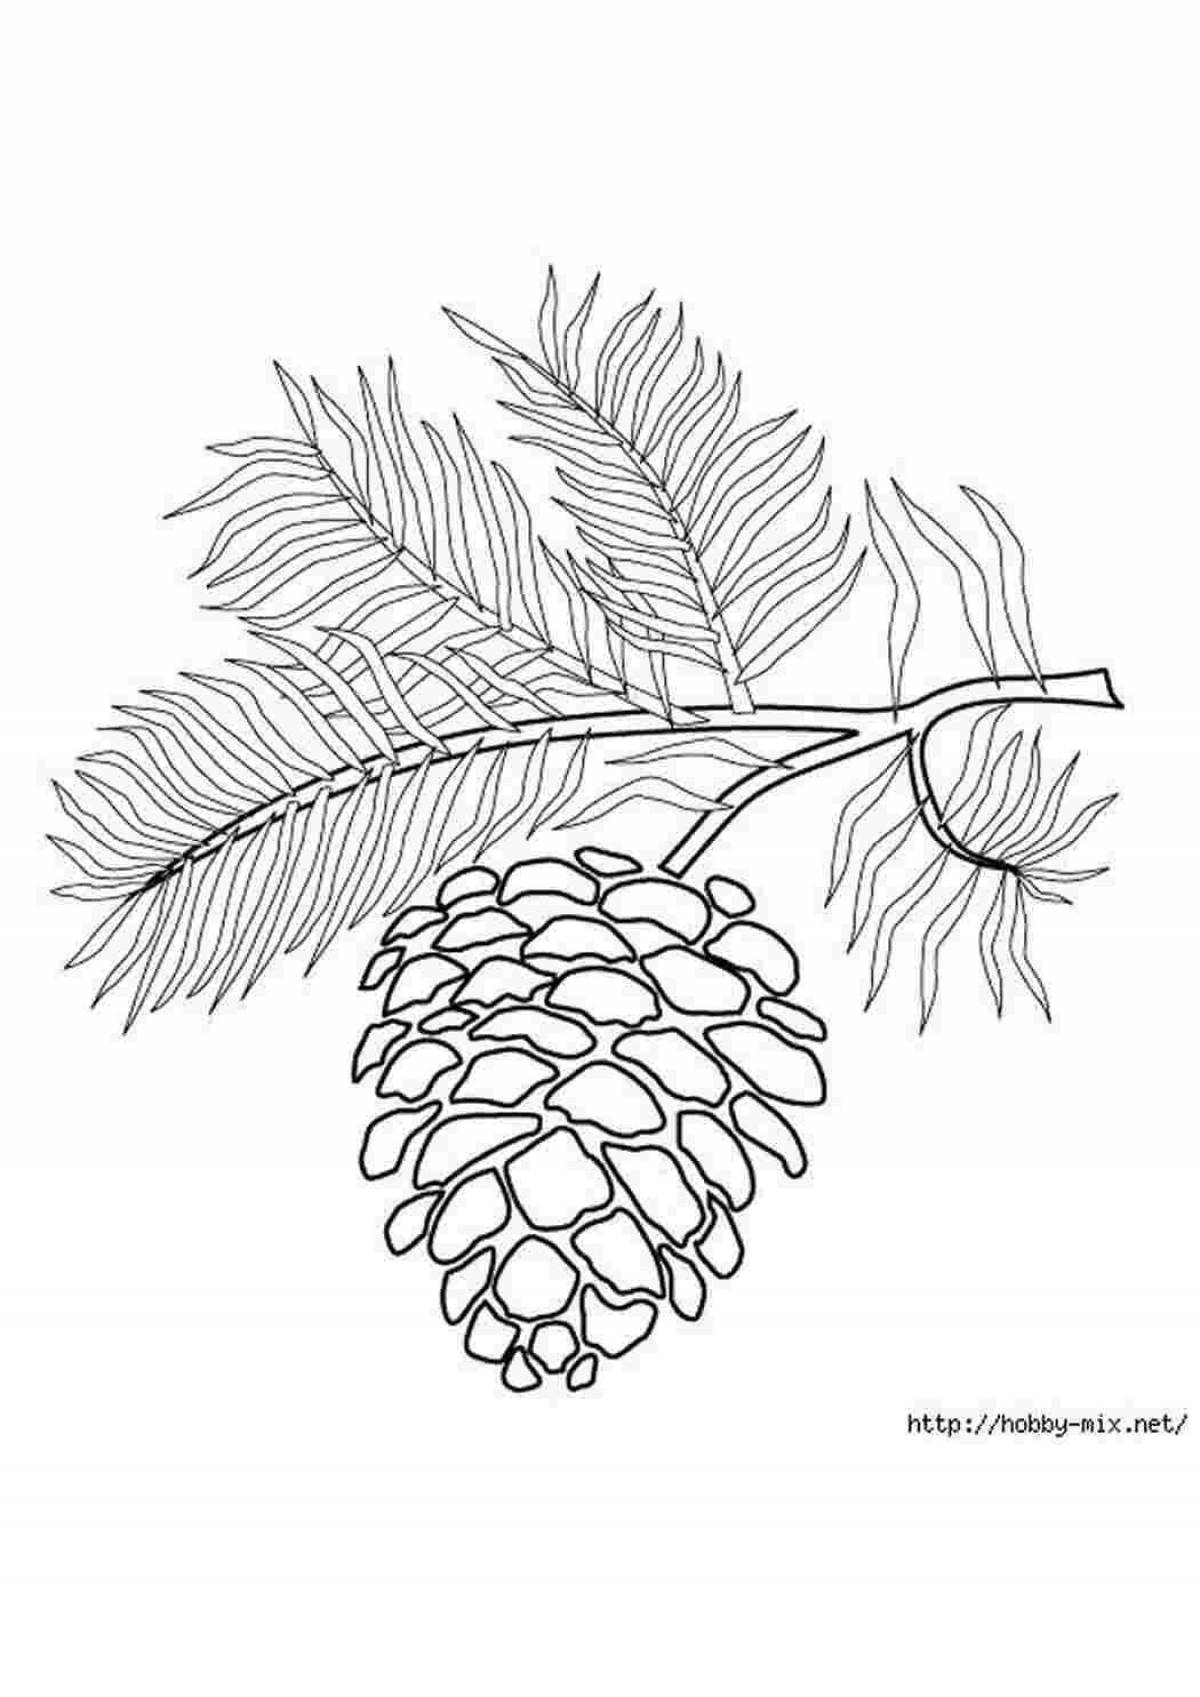 Fancy spruce branch coloring page